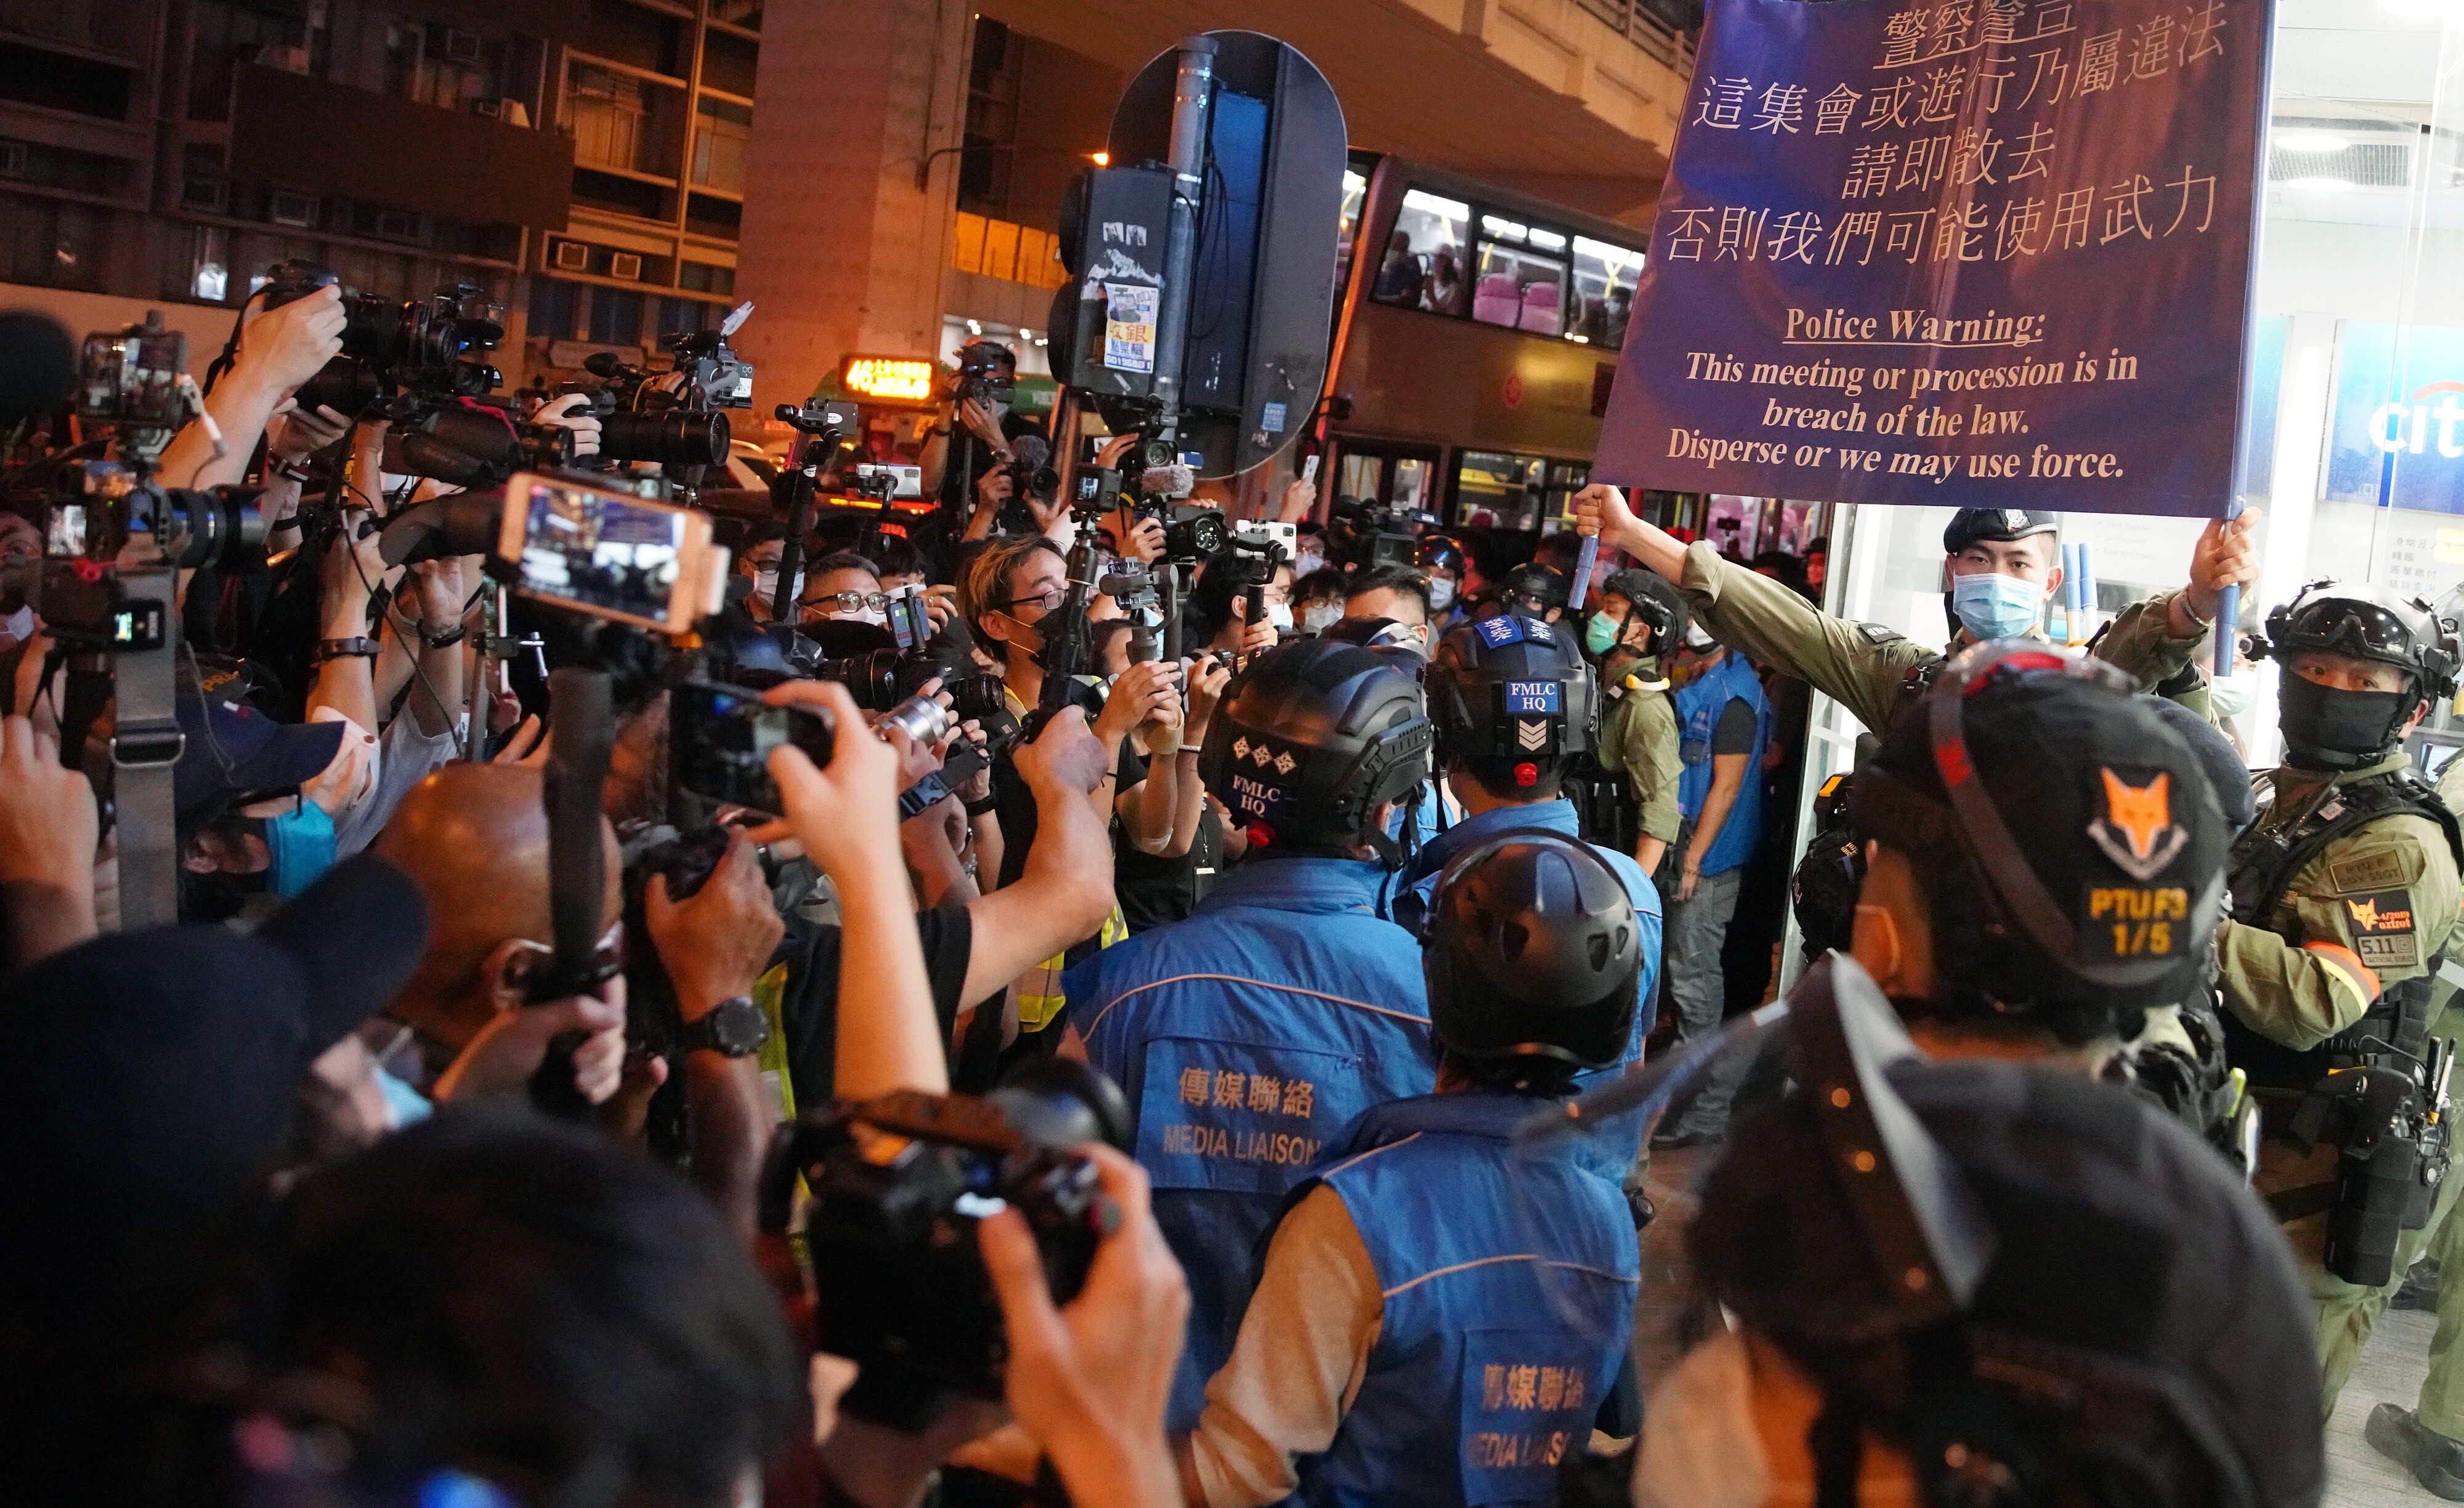 Police warn anti-government protestors to disperse, as they gather outside of the Prince Edward MTR station in memory of the first anniversary of the (831) Aug 31 Prince Edward MTR incident. Photo: SCMP / Winson Wong